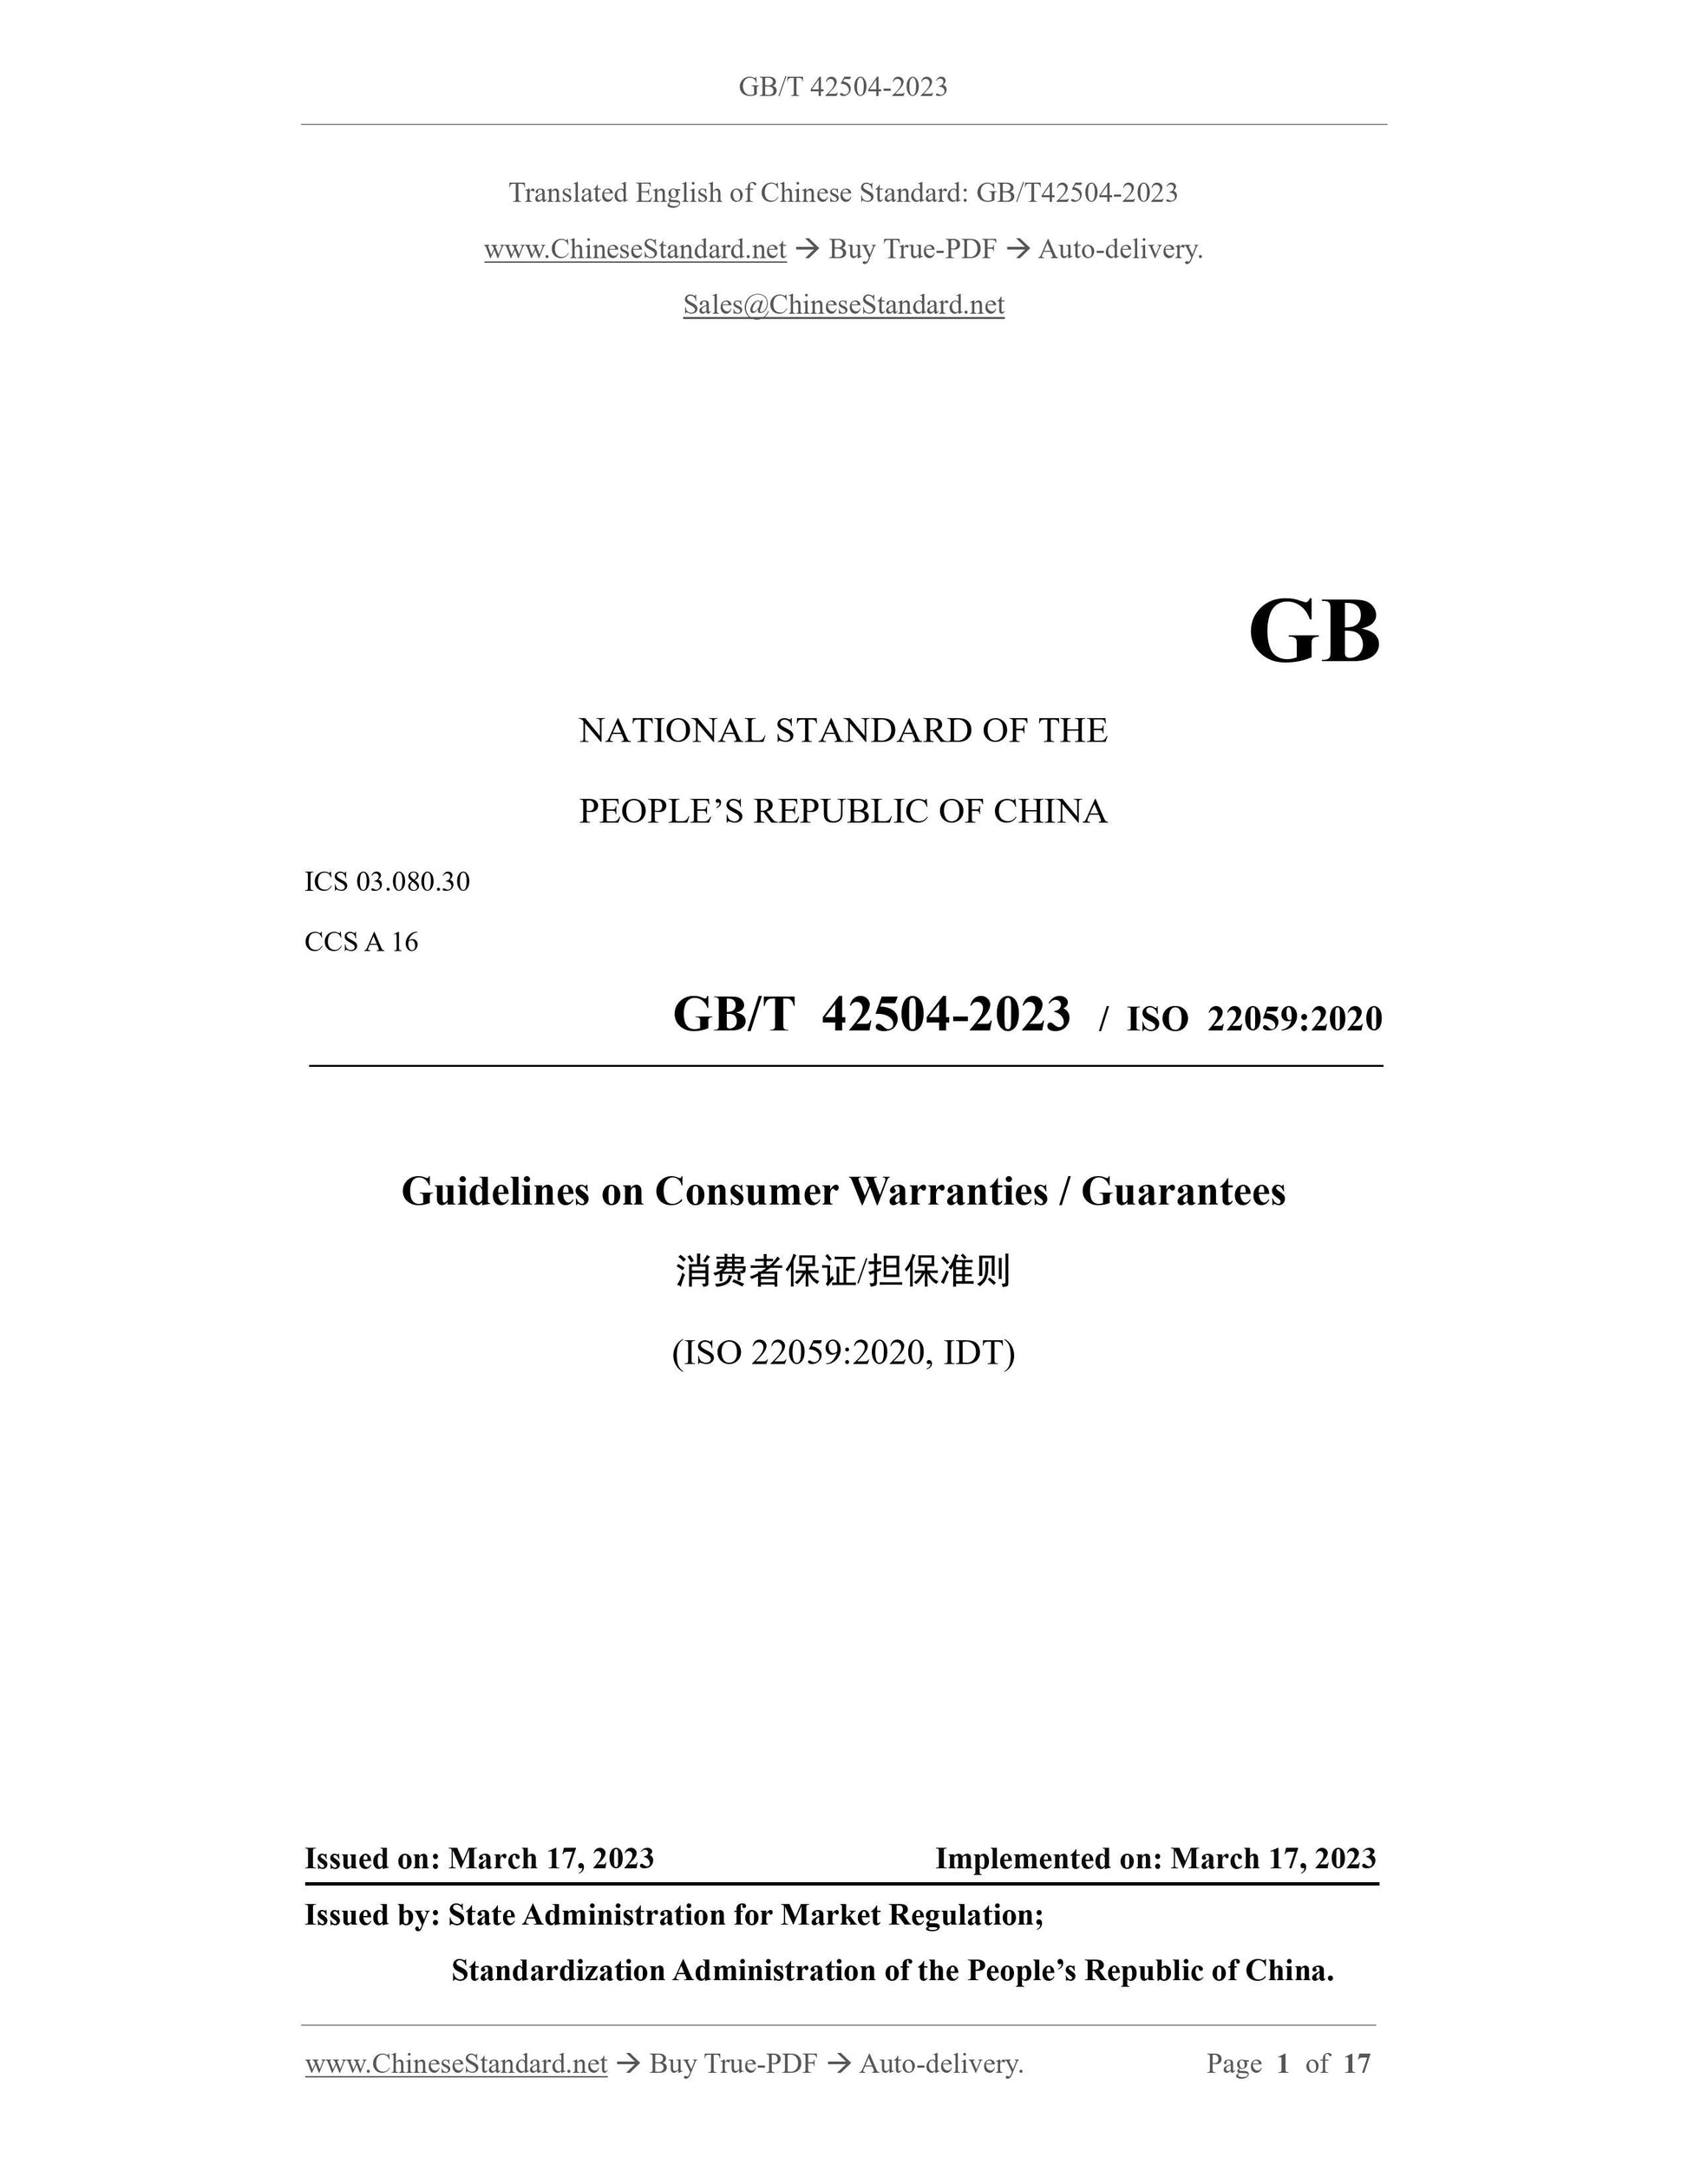 GB/T 42504-2023 Page 1